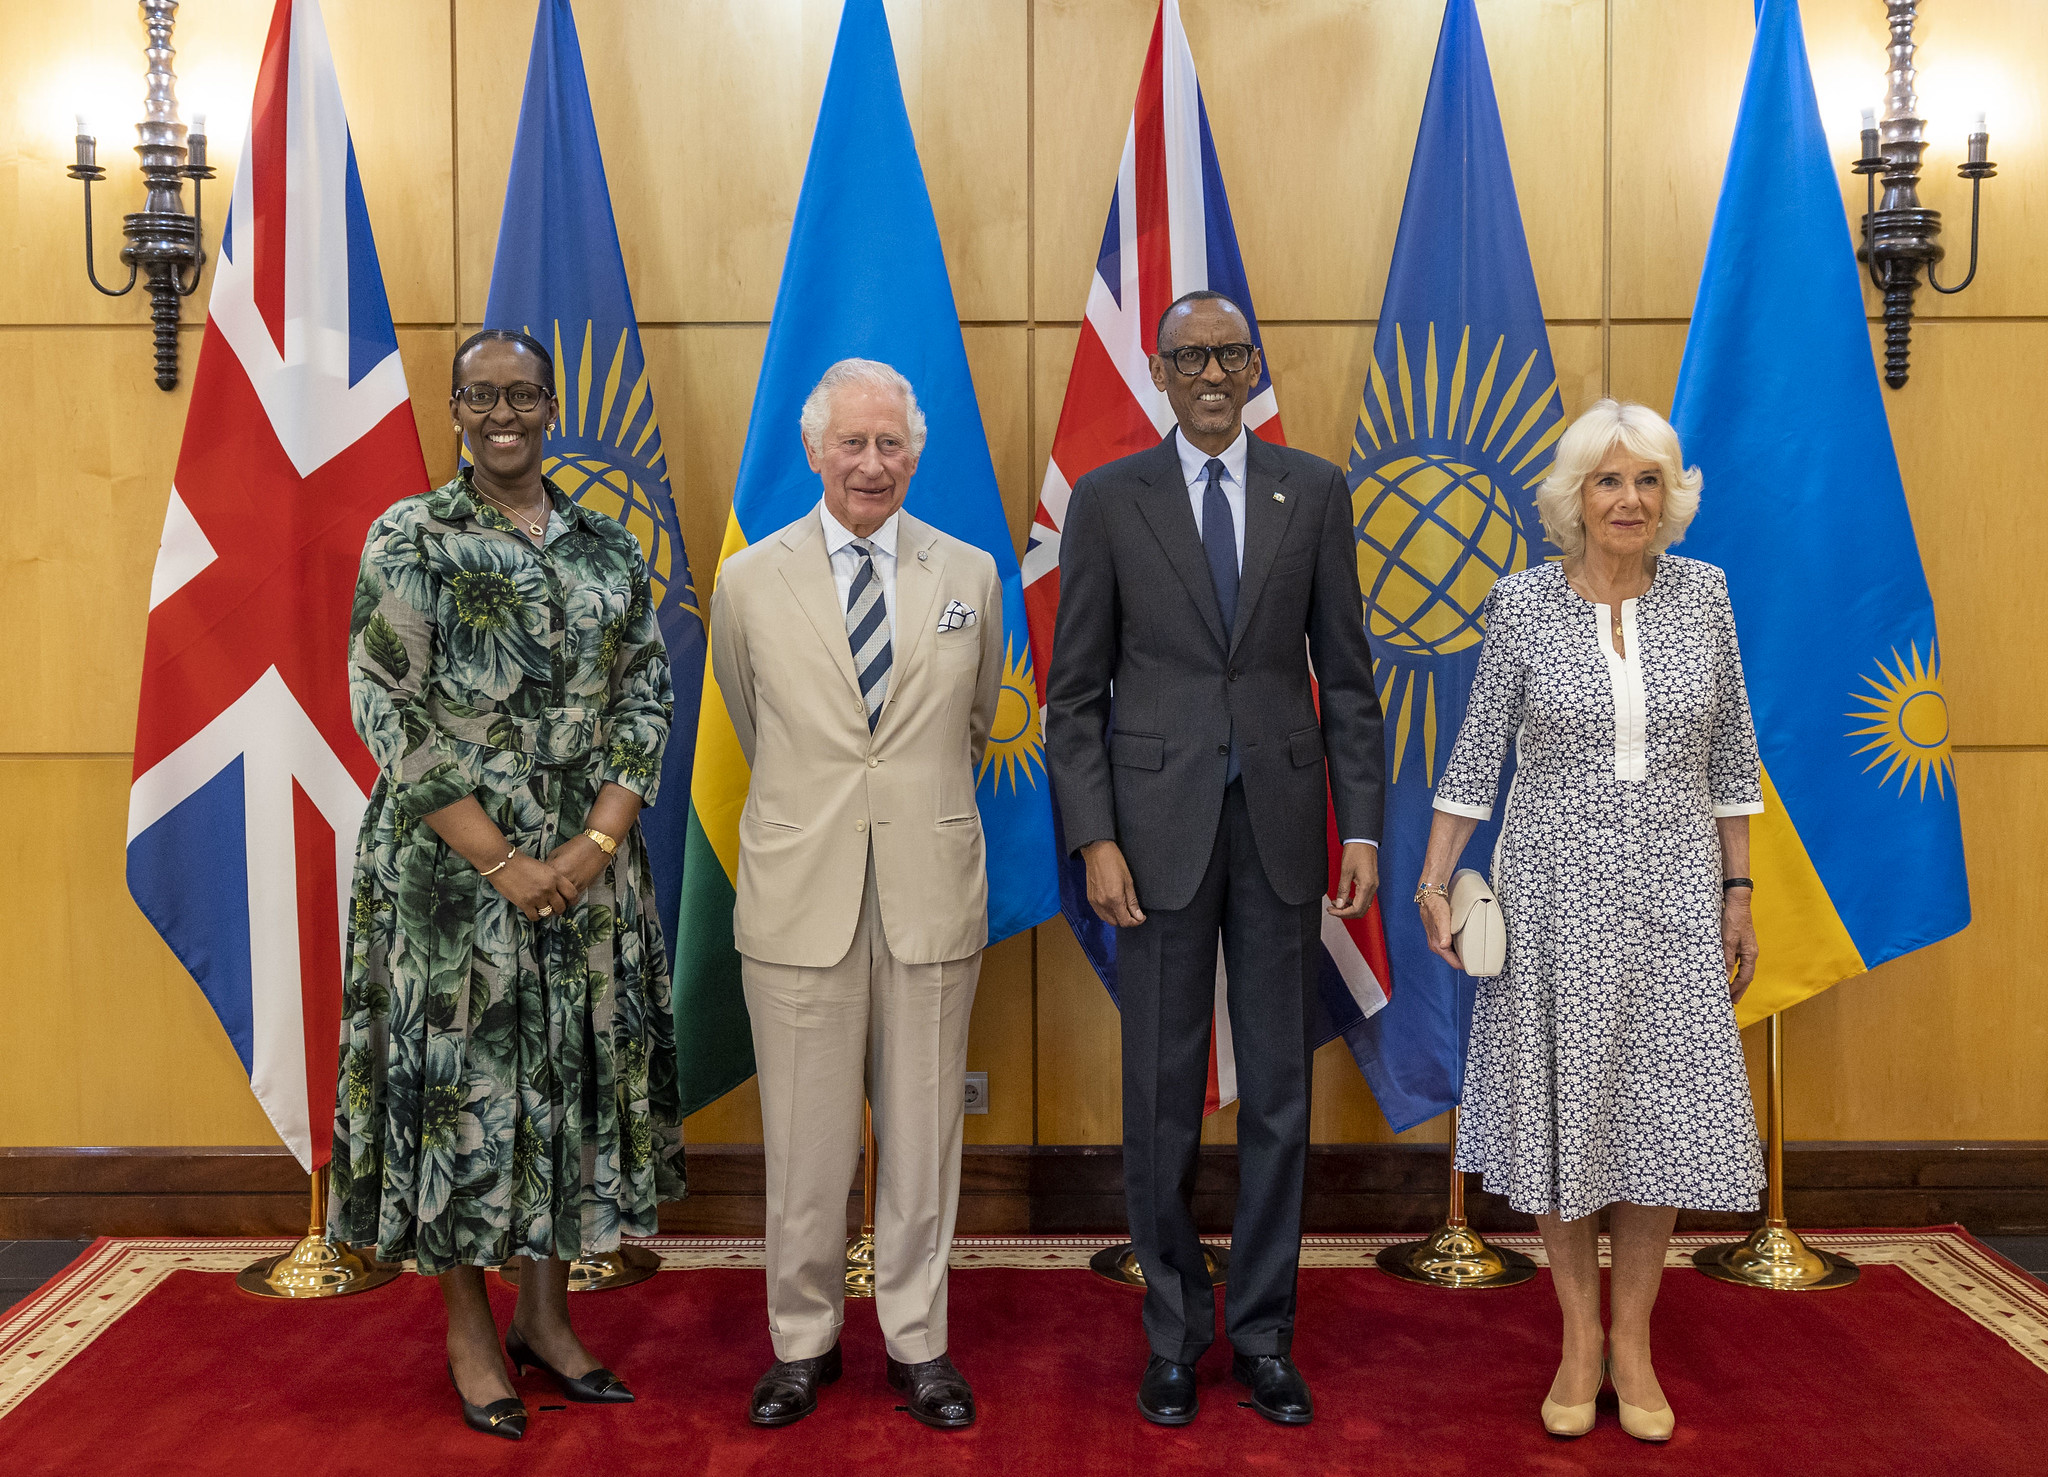 President Kagame and First Lady Mrs Jeannette Kagame receive Their Royal Highnesses The Prince of Wales and The Duchess of Cornwall | Kigali, 22 June 2022